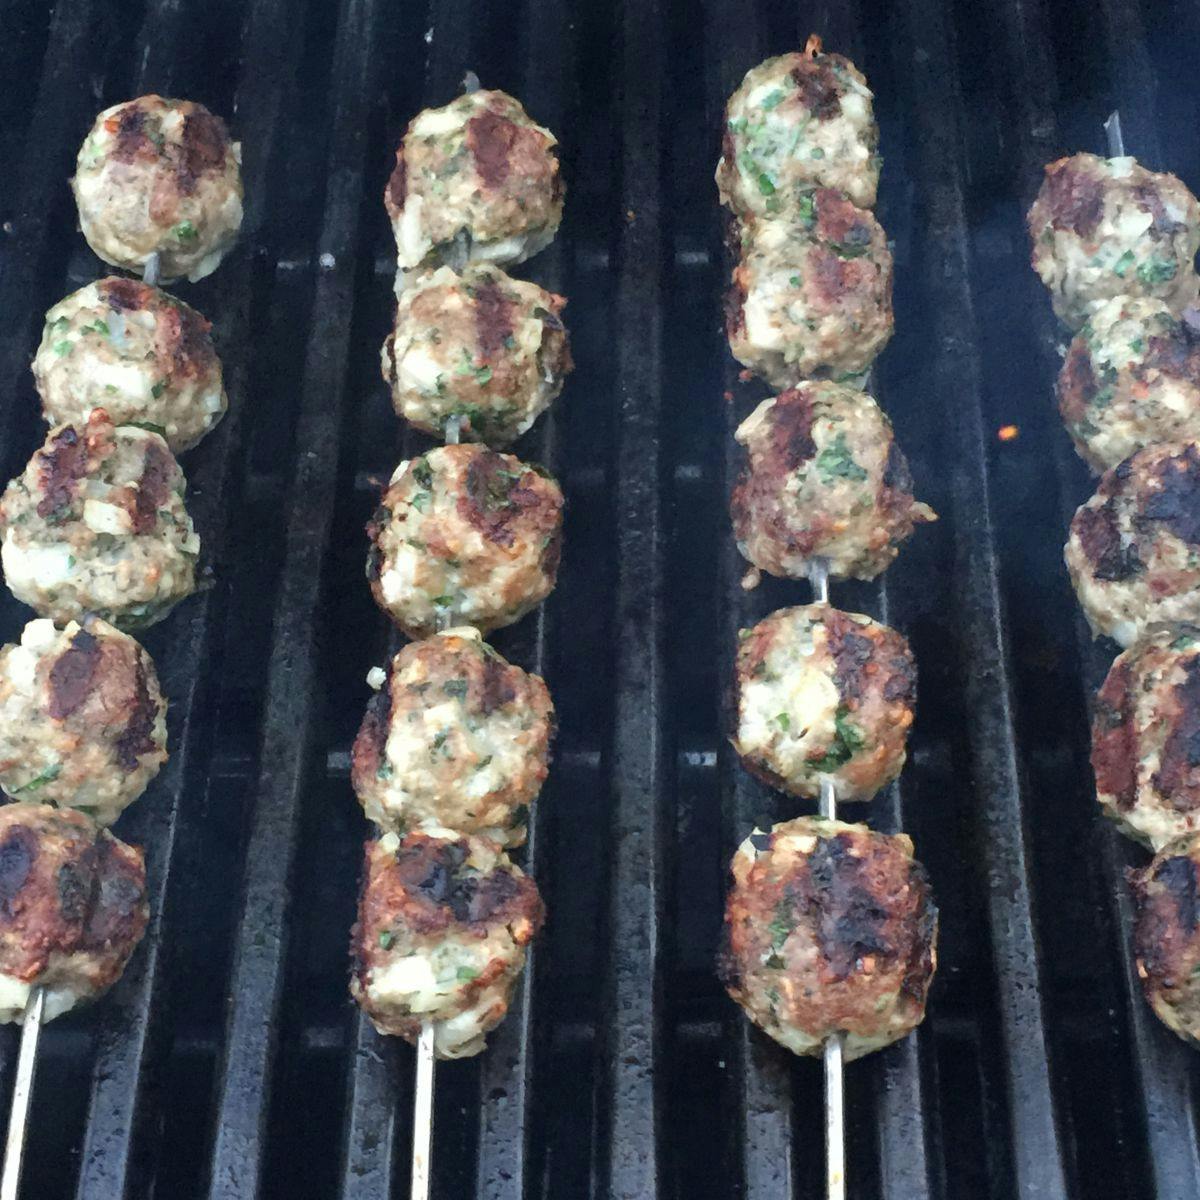 Meatballs on a gas grill - Grilling meatballs